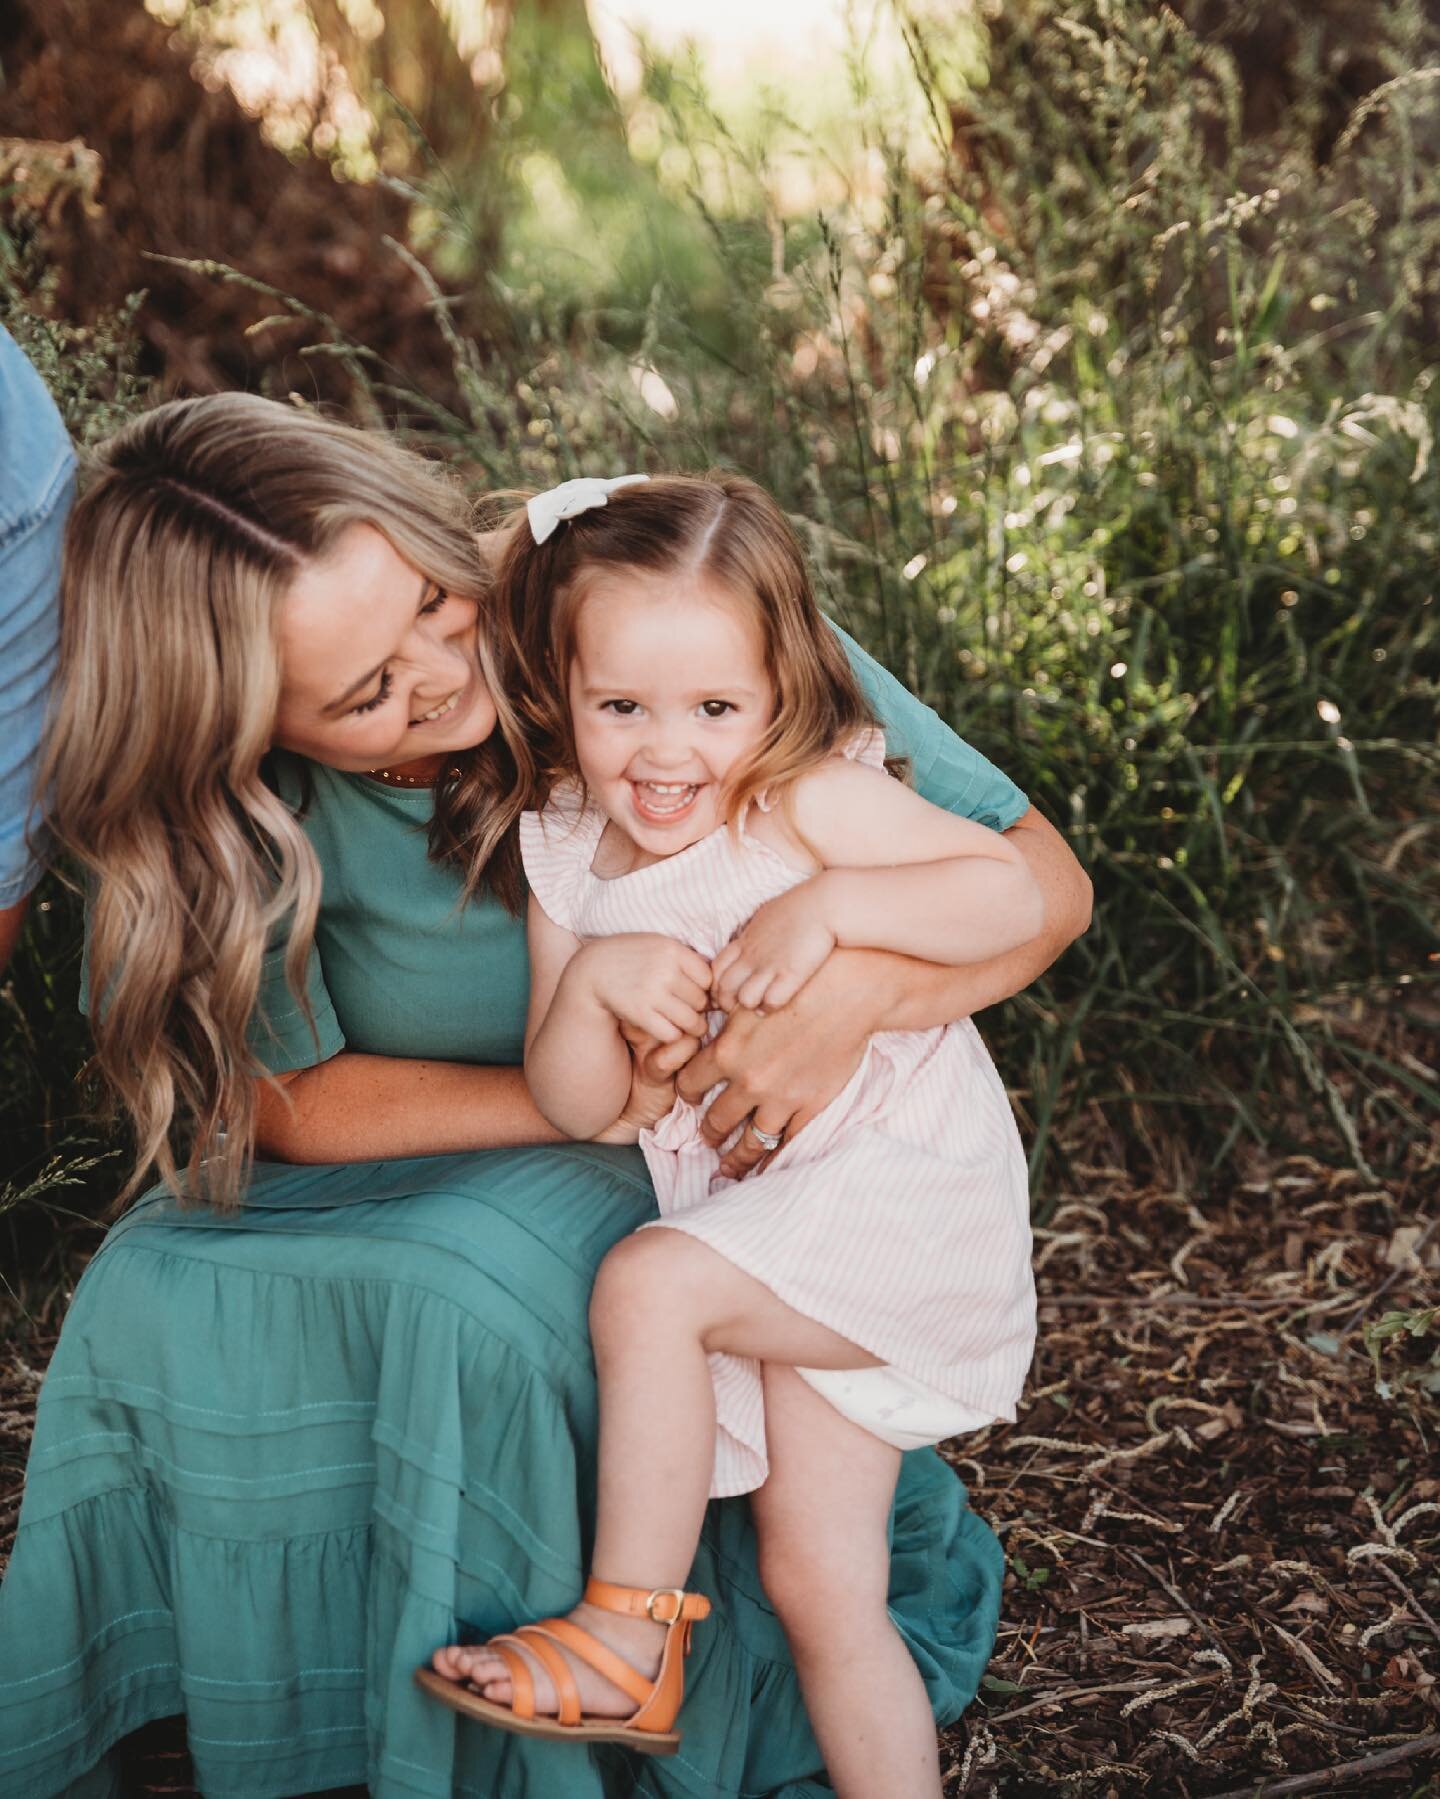 I don&rsquo;t want you to worry too much, especially when it comes to your kids. My job is to capture real life moments. So here are a few tips to help your session go smoothly.

Have your kiddos take a nap if they need it. It's so important, specifi